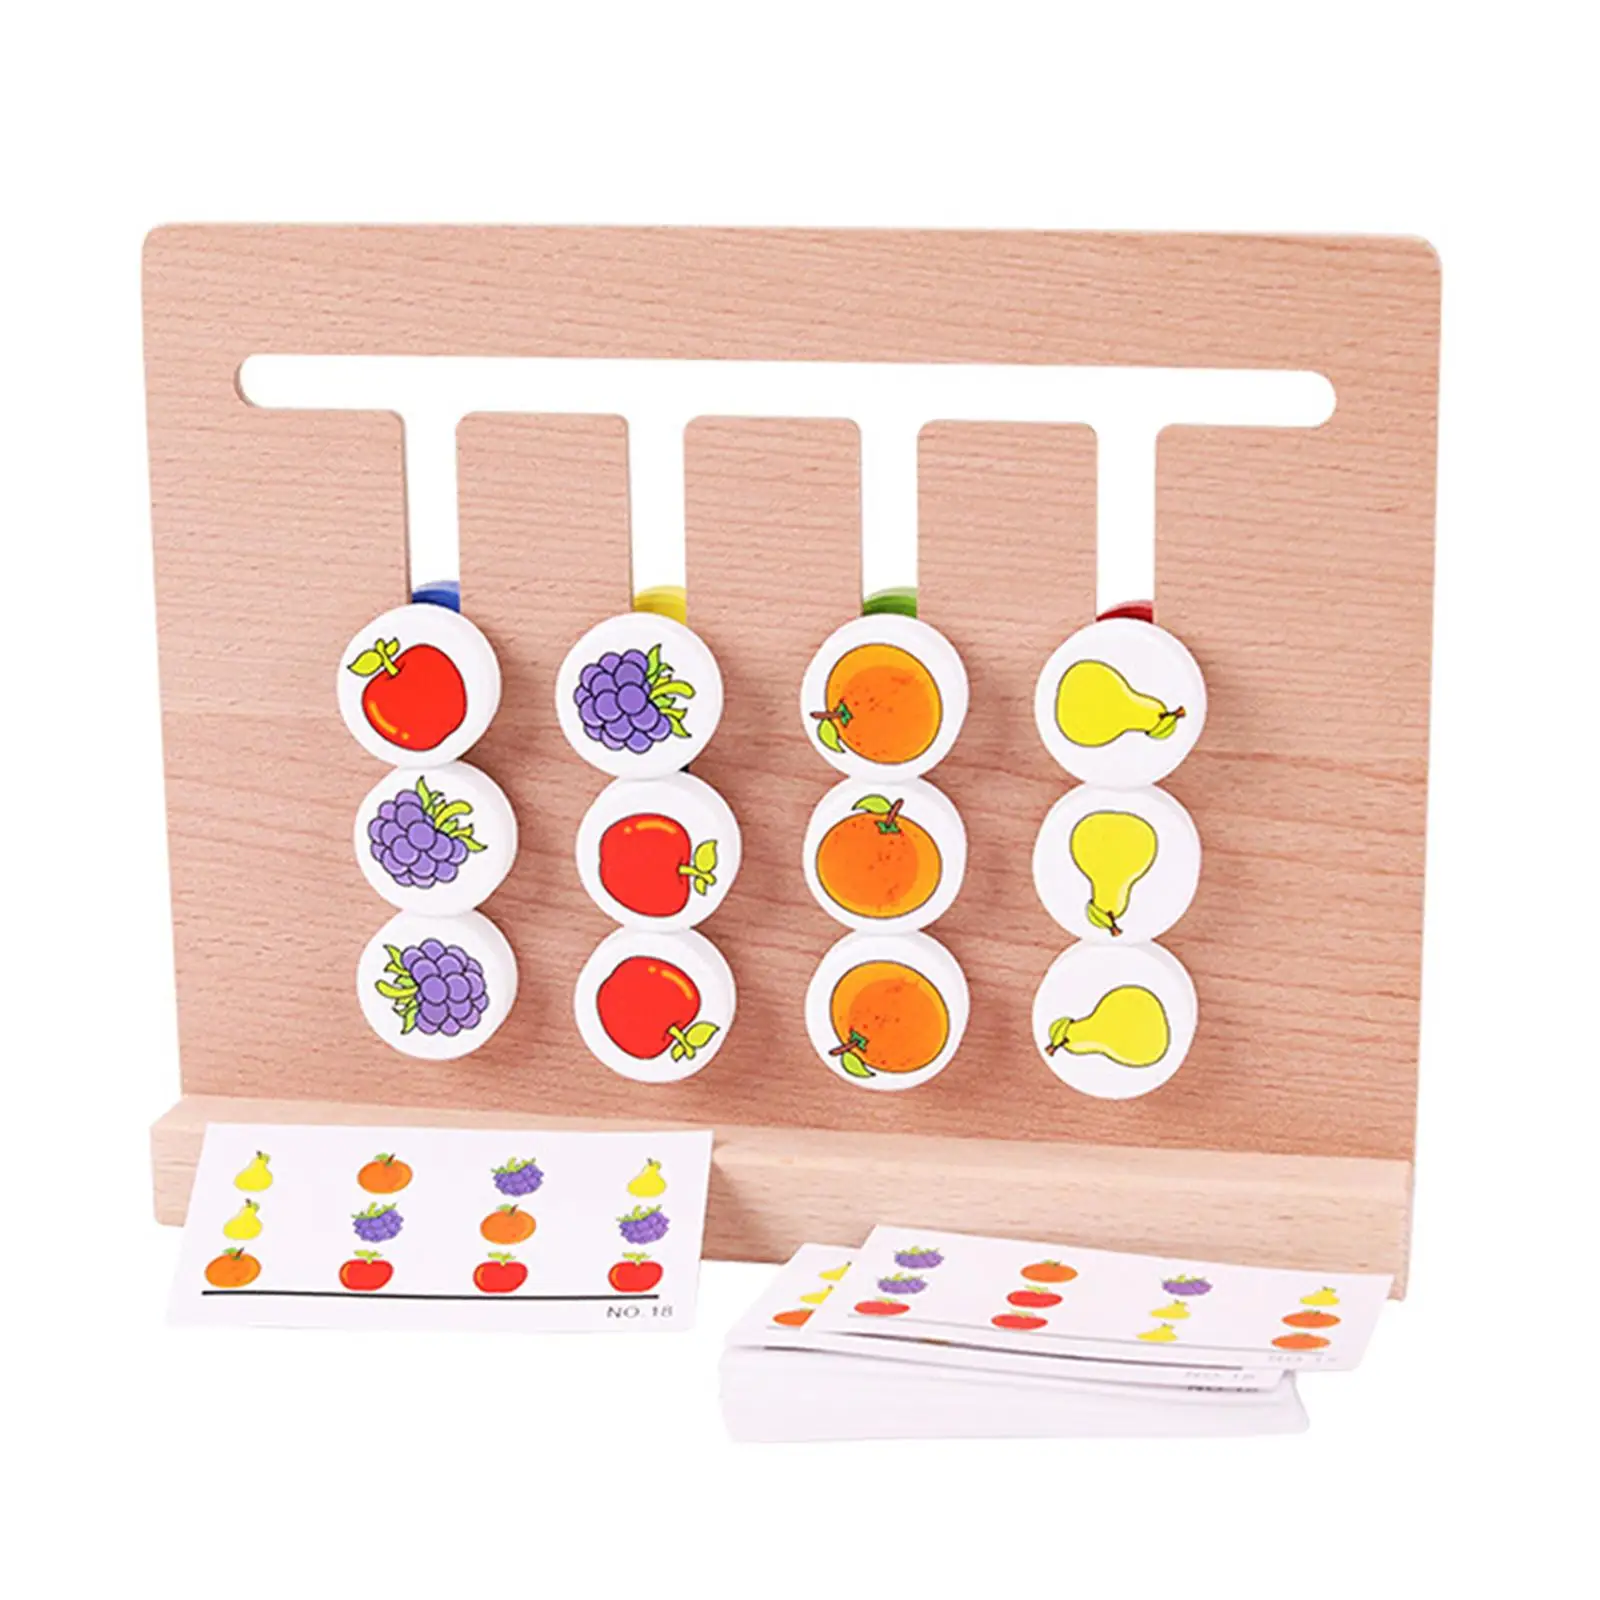 Early Education Matching Logical Game Gifts Double Sided Practical Multipurpose Color Sort Board for Kindergarten Girls Boys